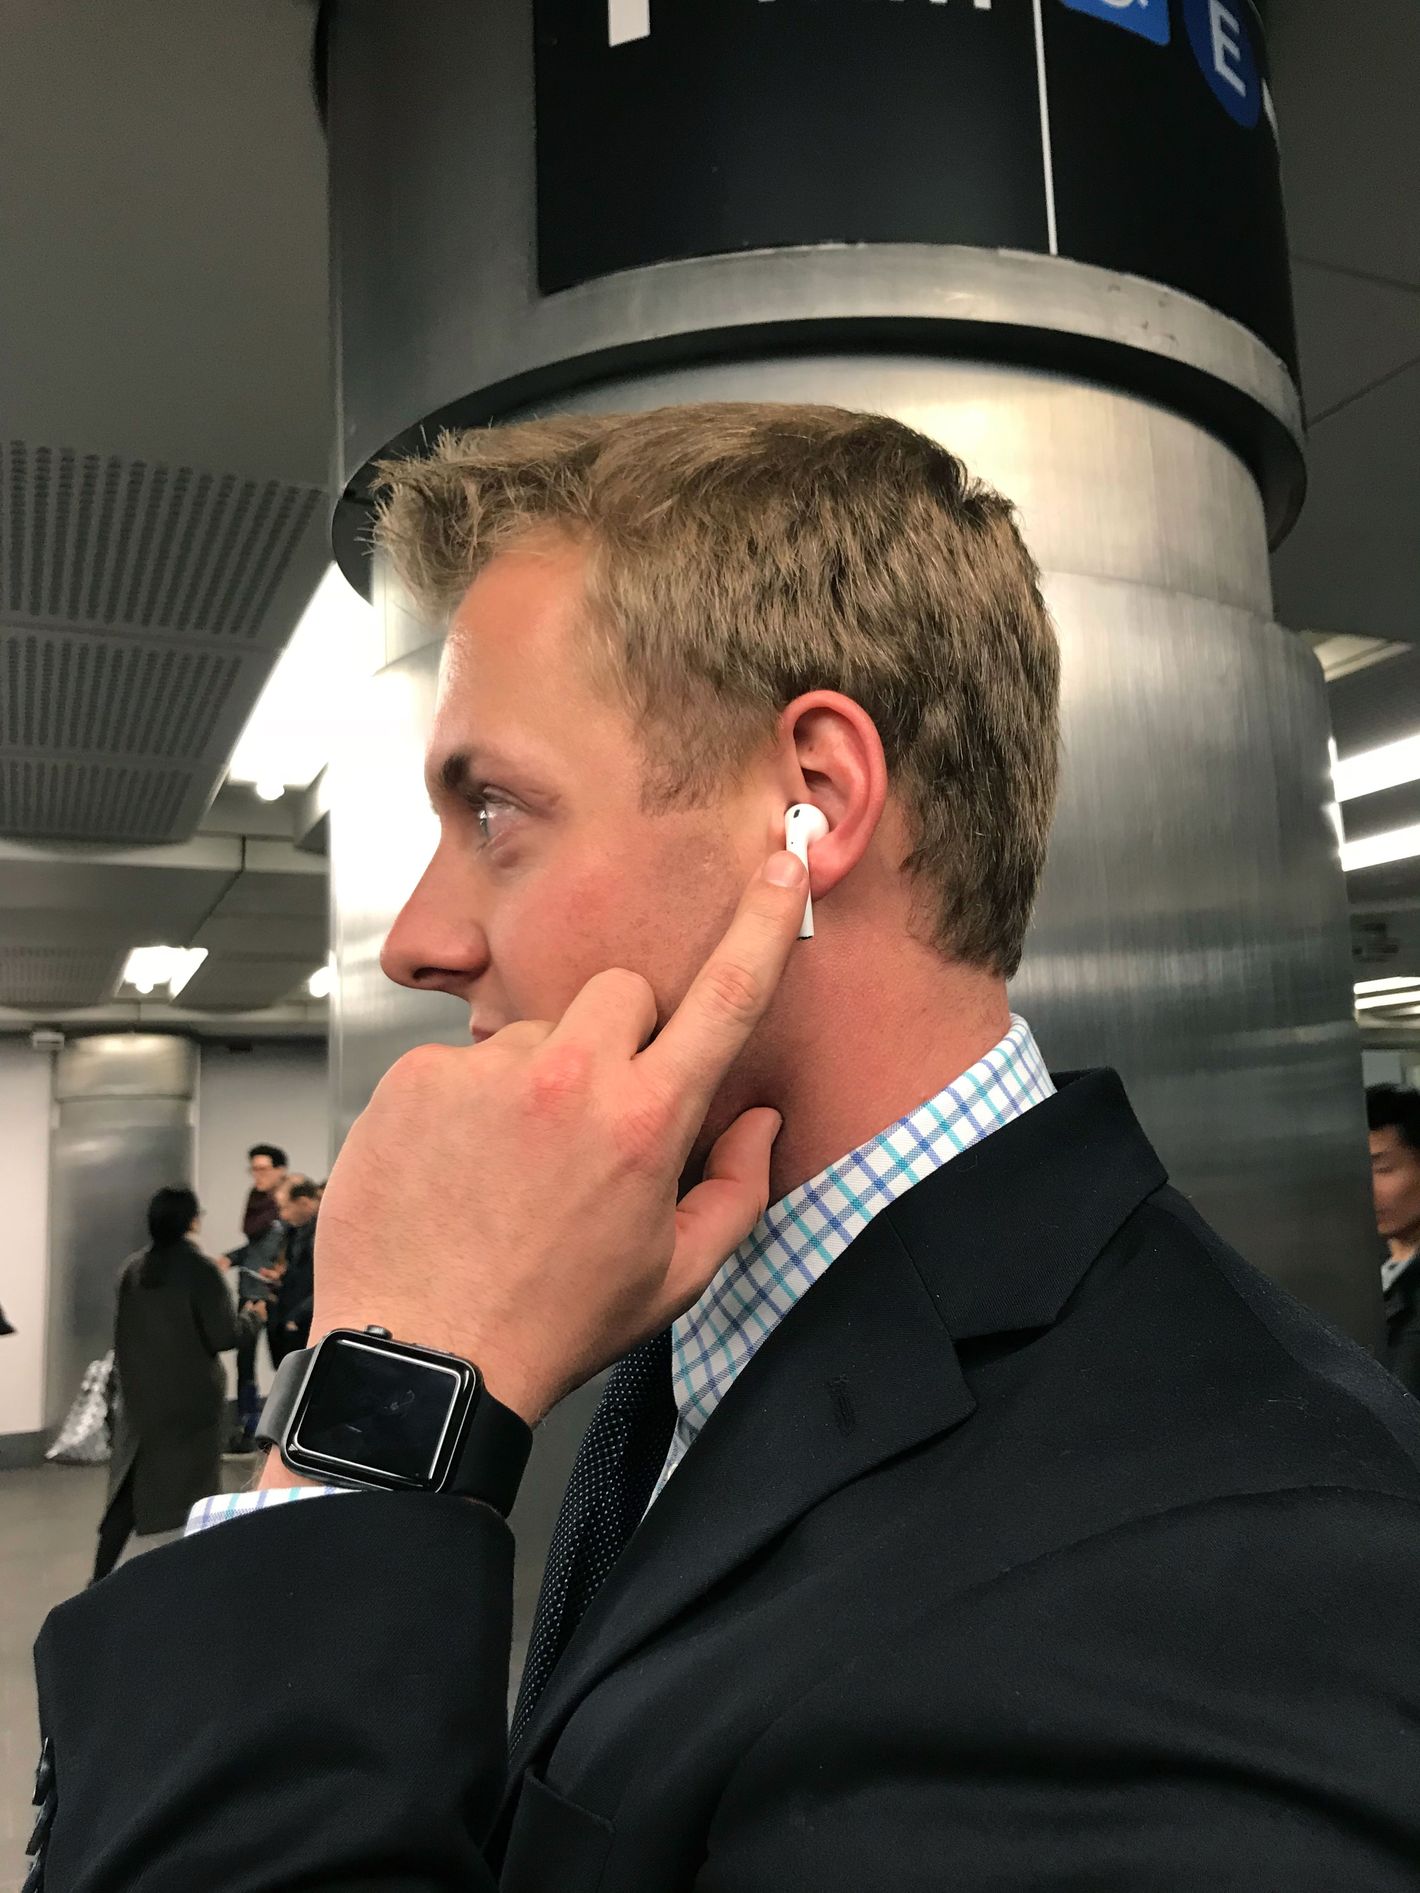 How to Wear AirPods Without Looking Like Idiot